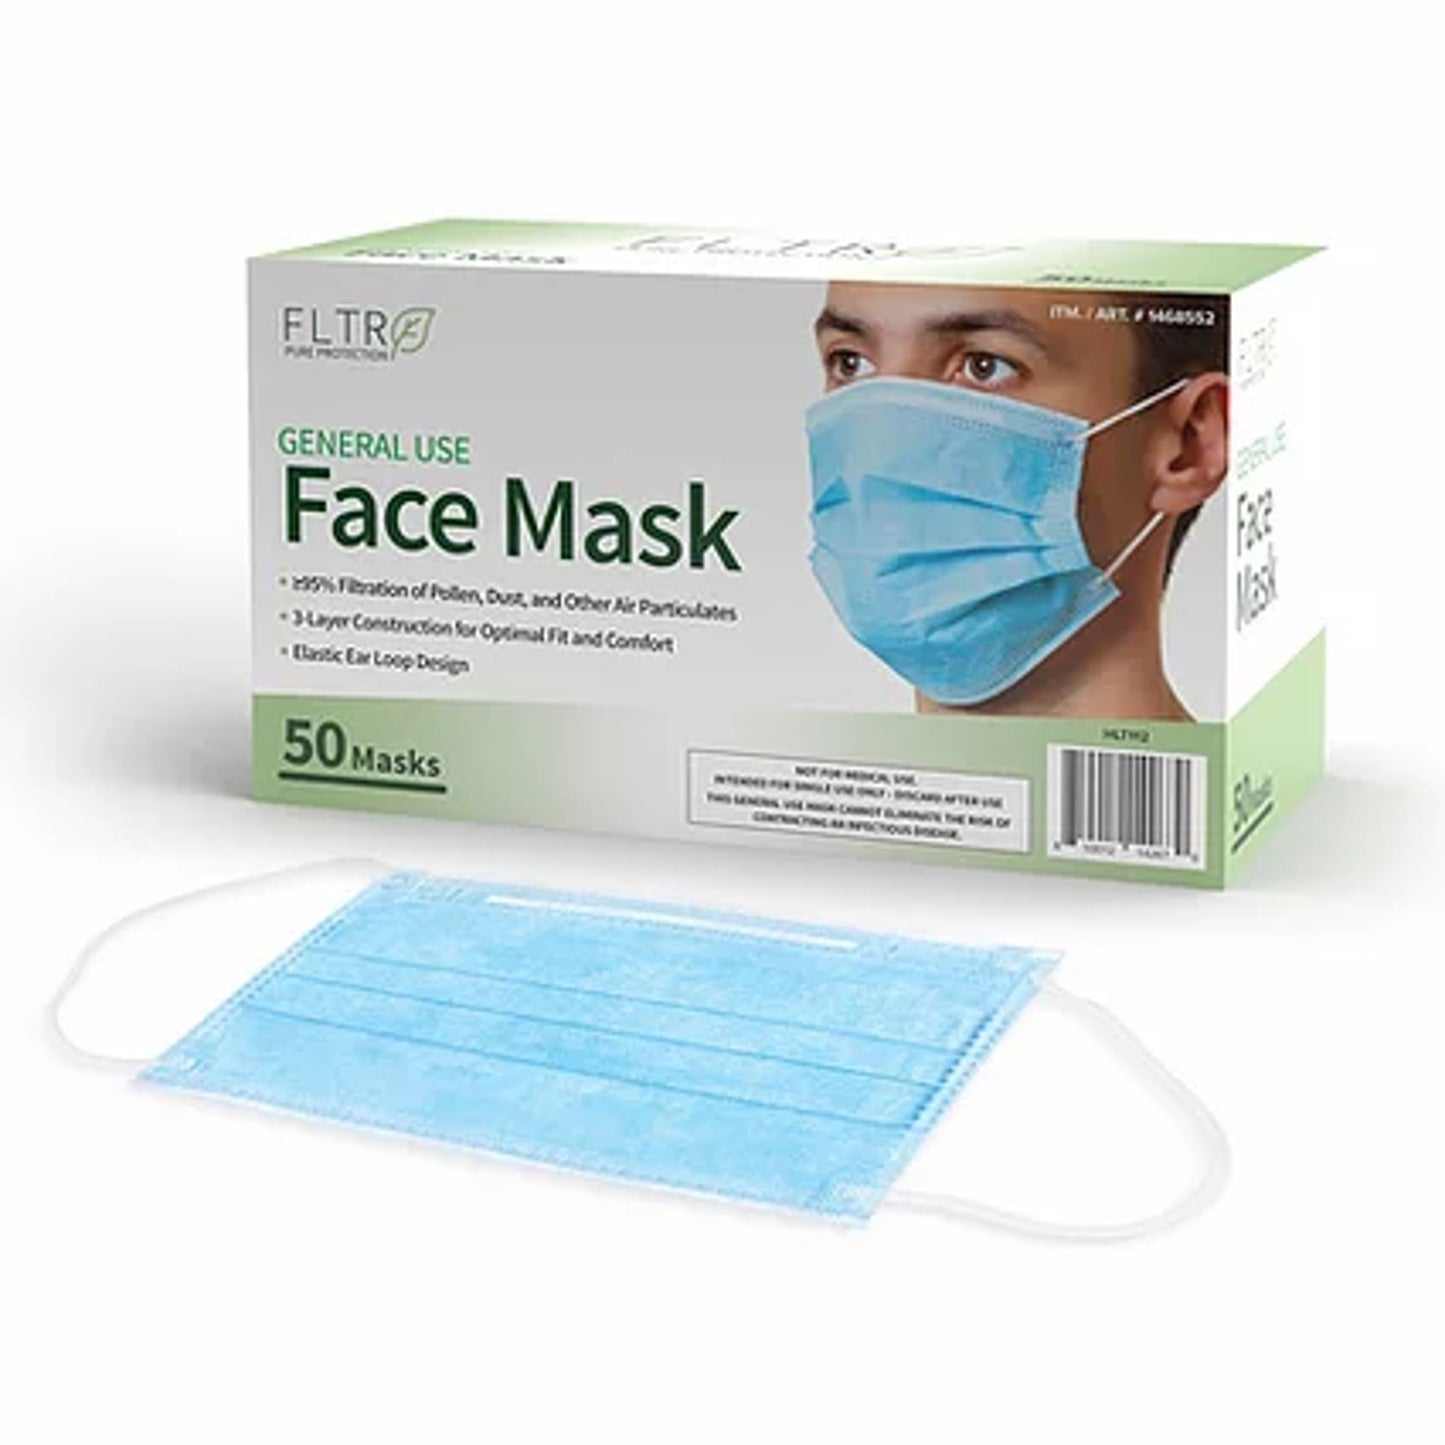 FLTR Face Mask Sized for Adults 3-layer 95% Filtration Blue 1 Case - 50 Pack